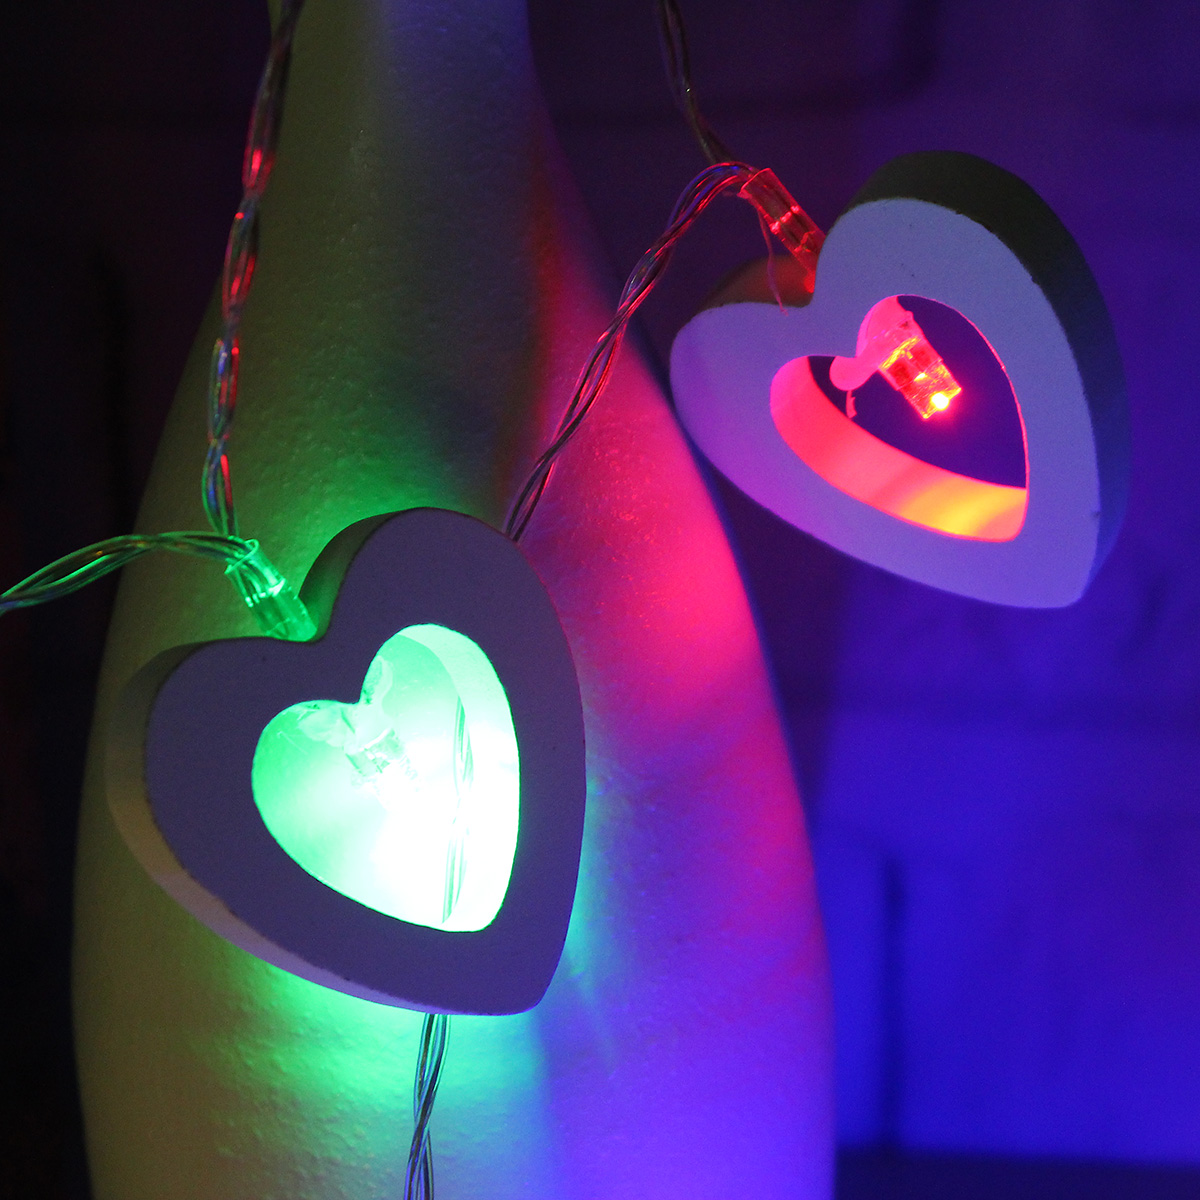 18M-03W-Wooden-Heart-Shape-Battery-Powered-10LED-Fairy-String-Light-for-Christmas-Home-Party-Decor-D-1630337-5